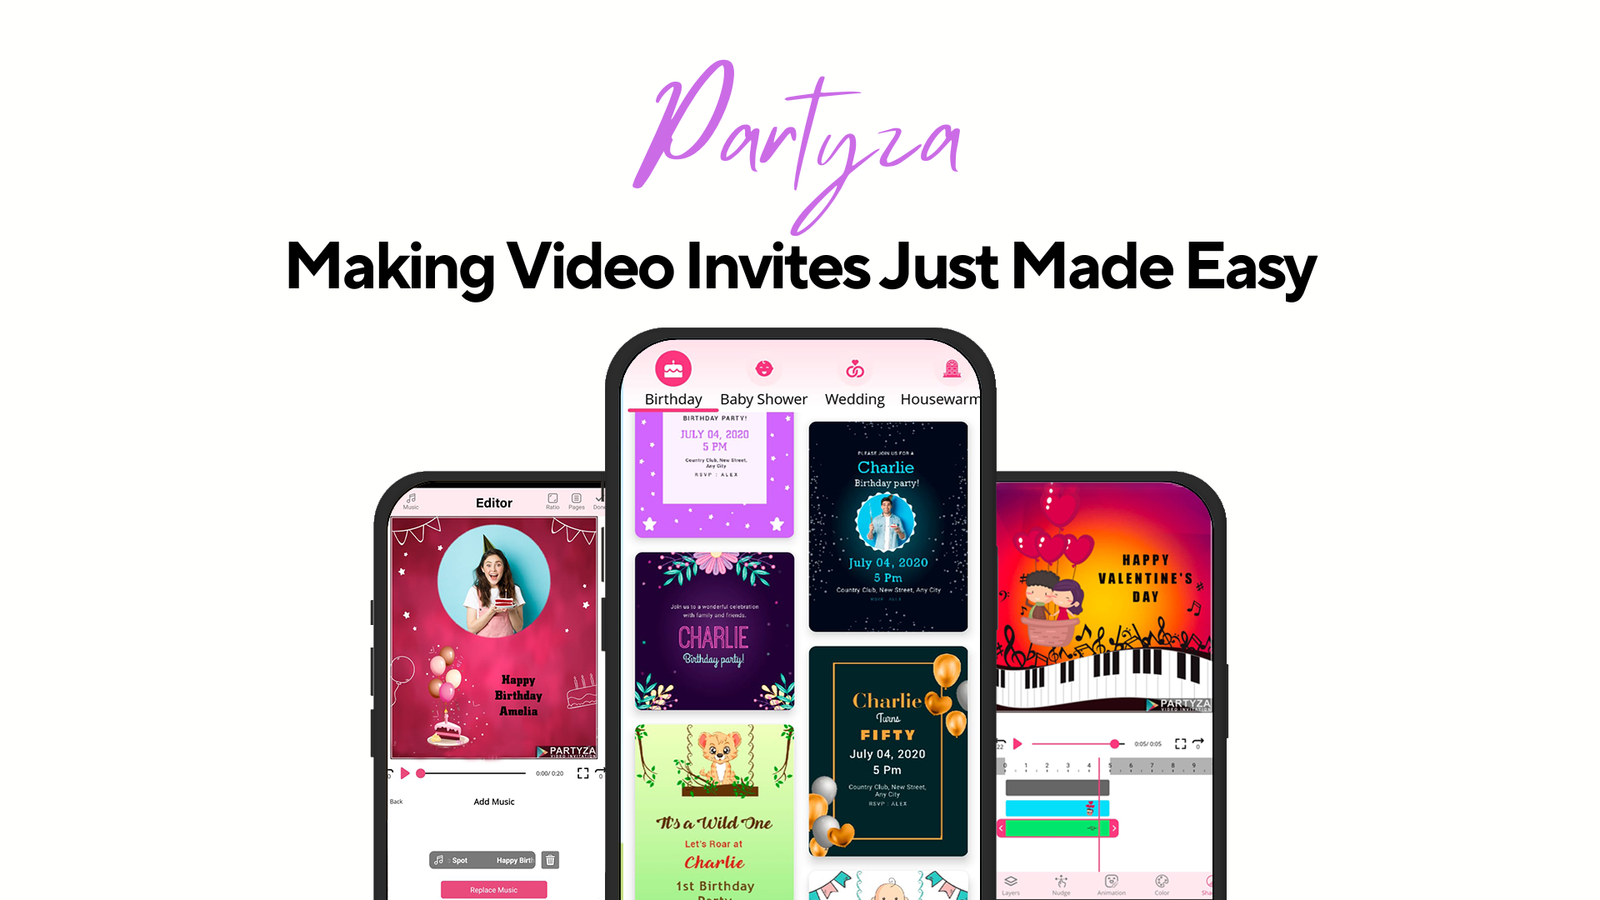 How To Make Video Invitations For Free?